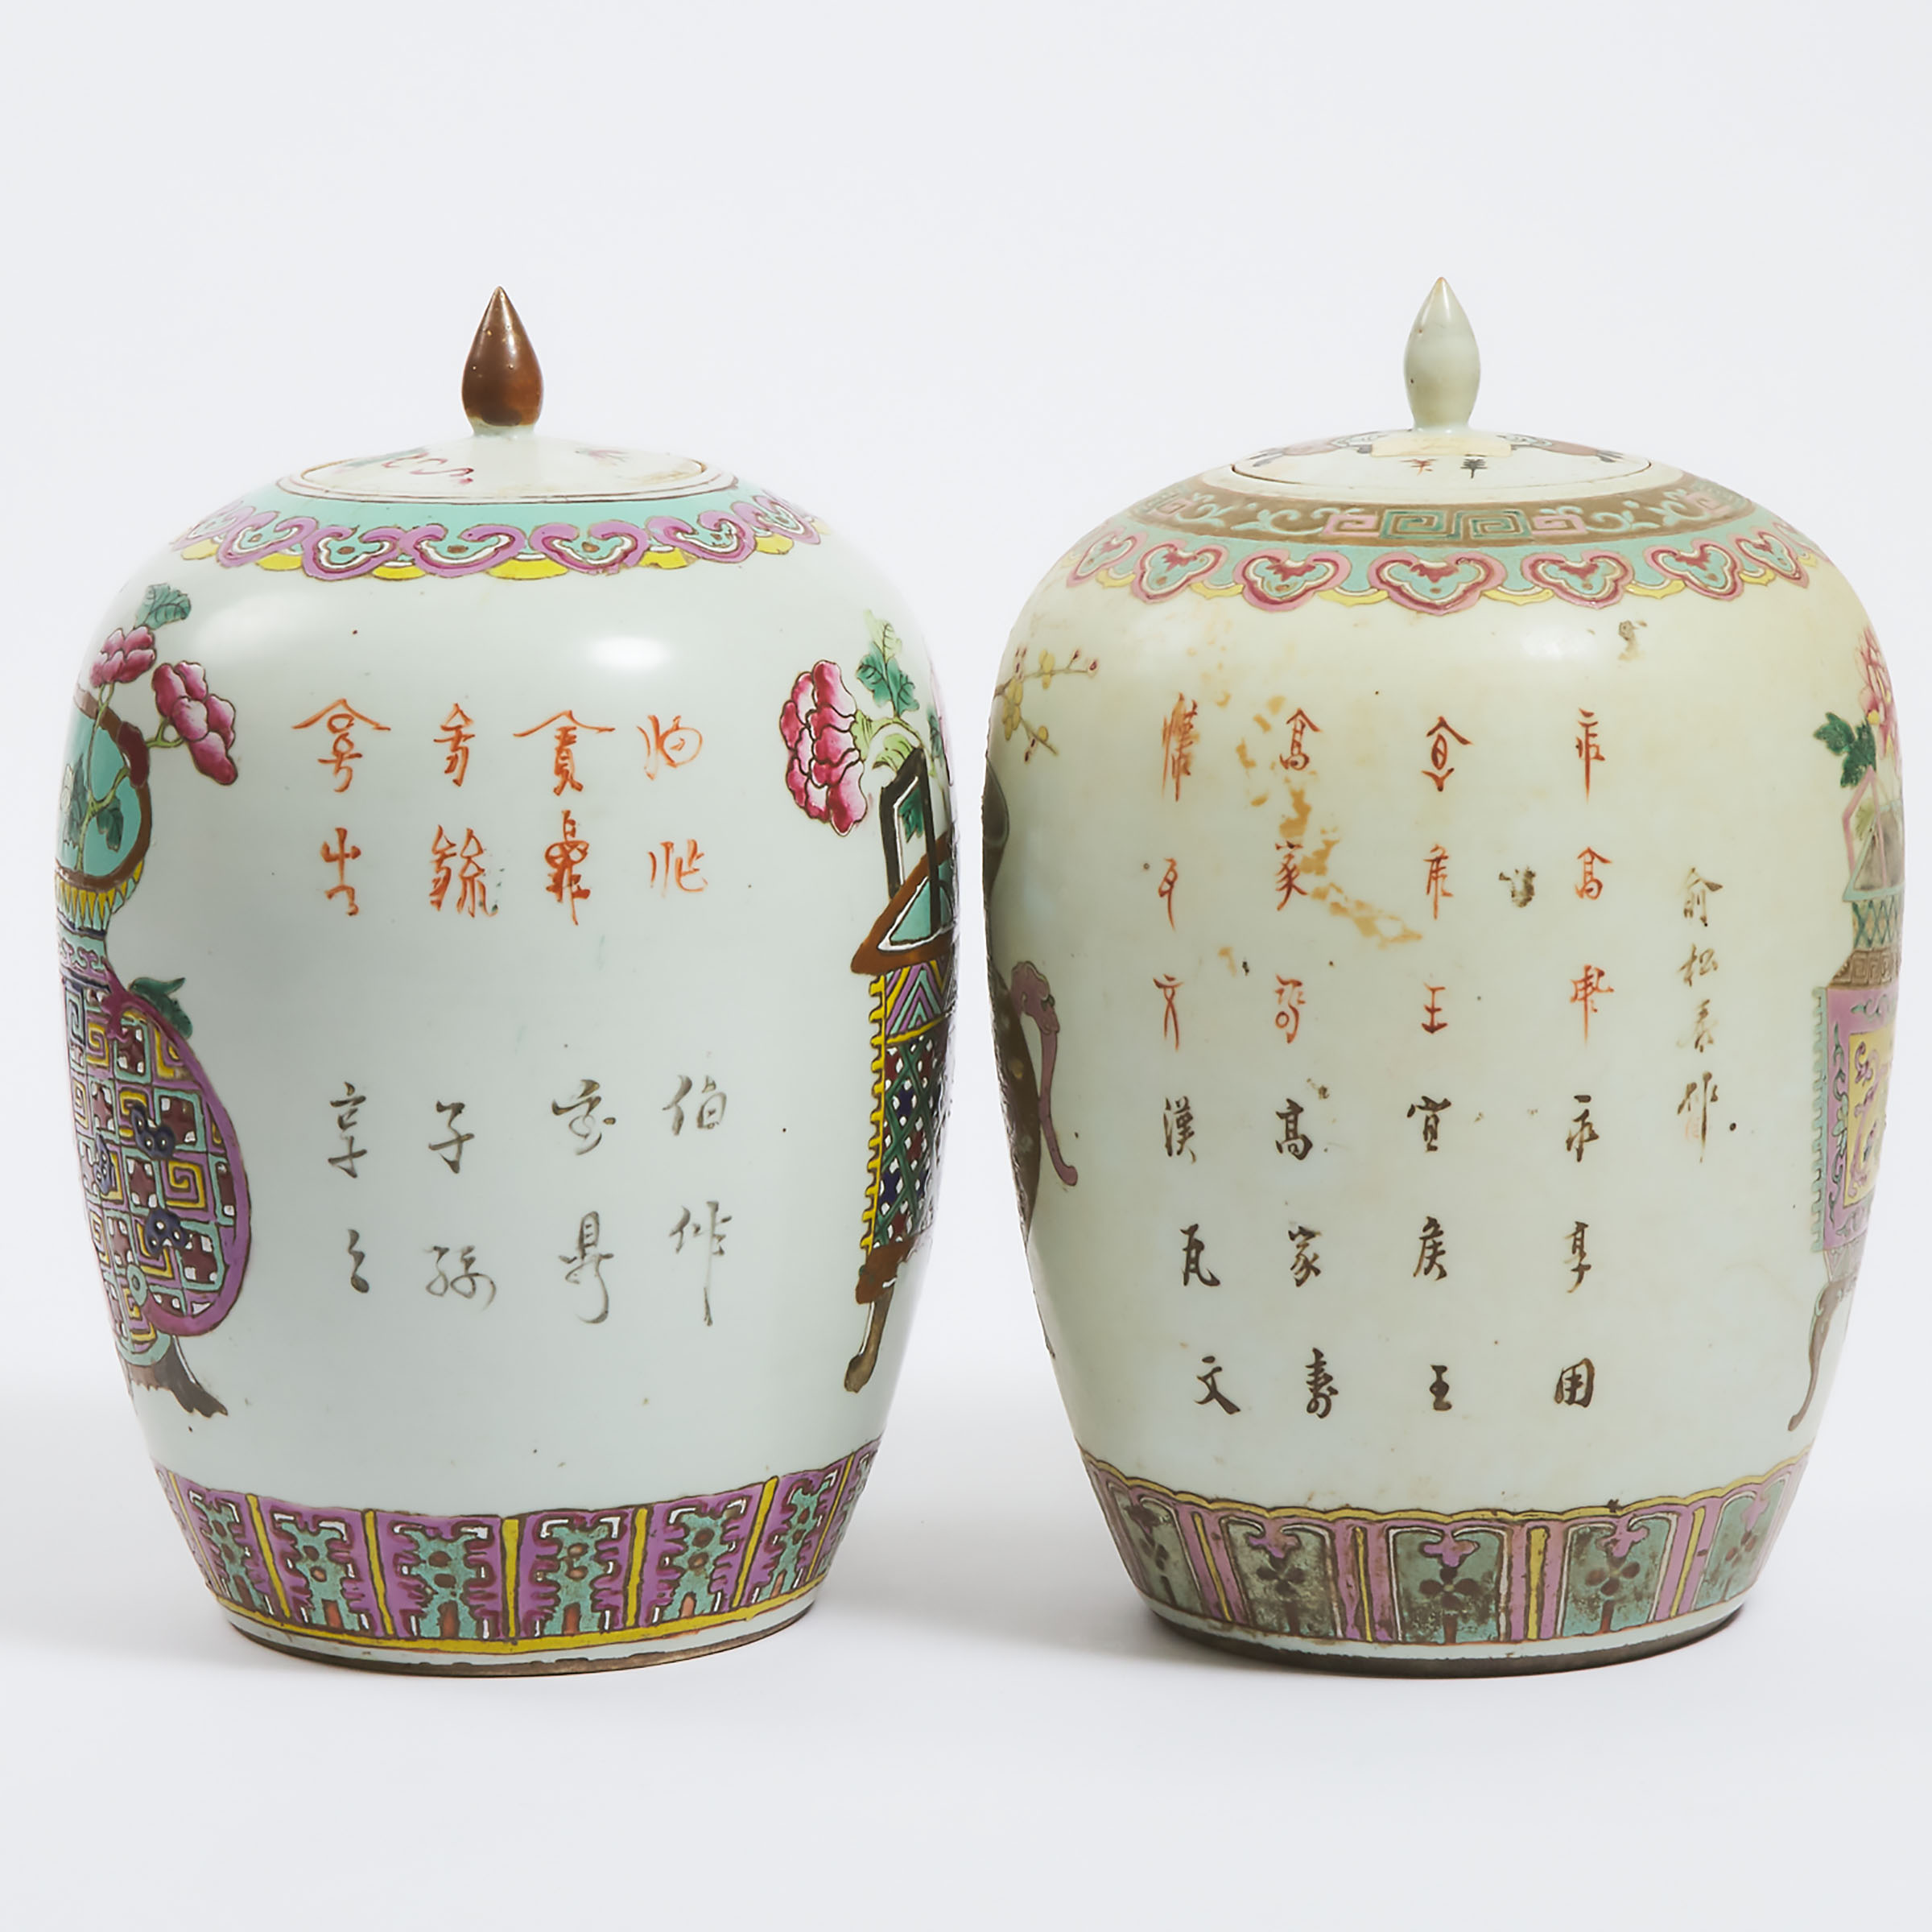 Two Famille Rose 'Hundred Antiques' Lidded Jars, Republican Period